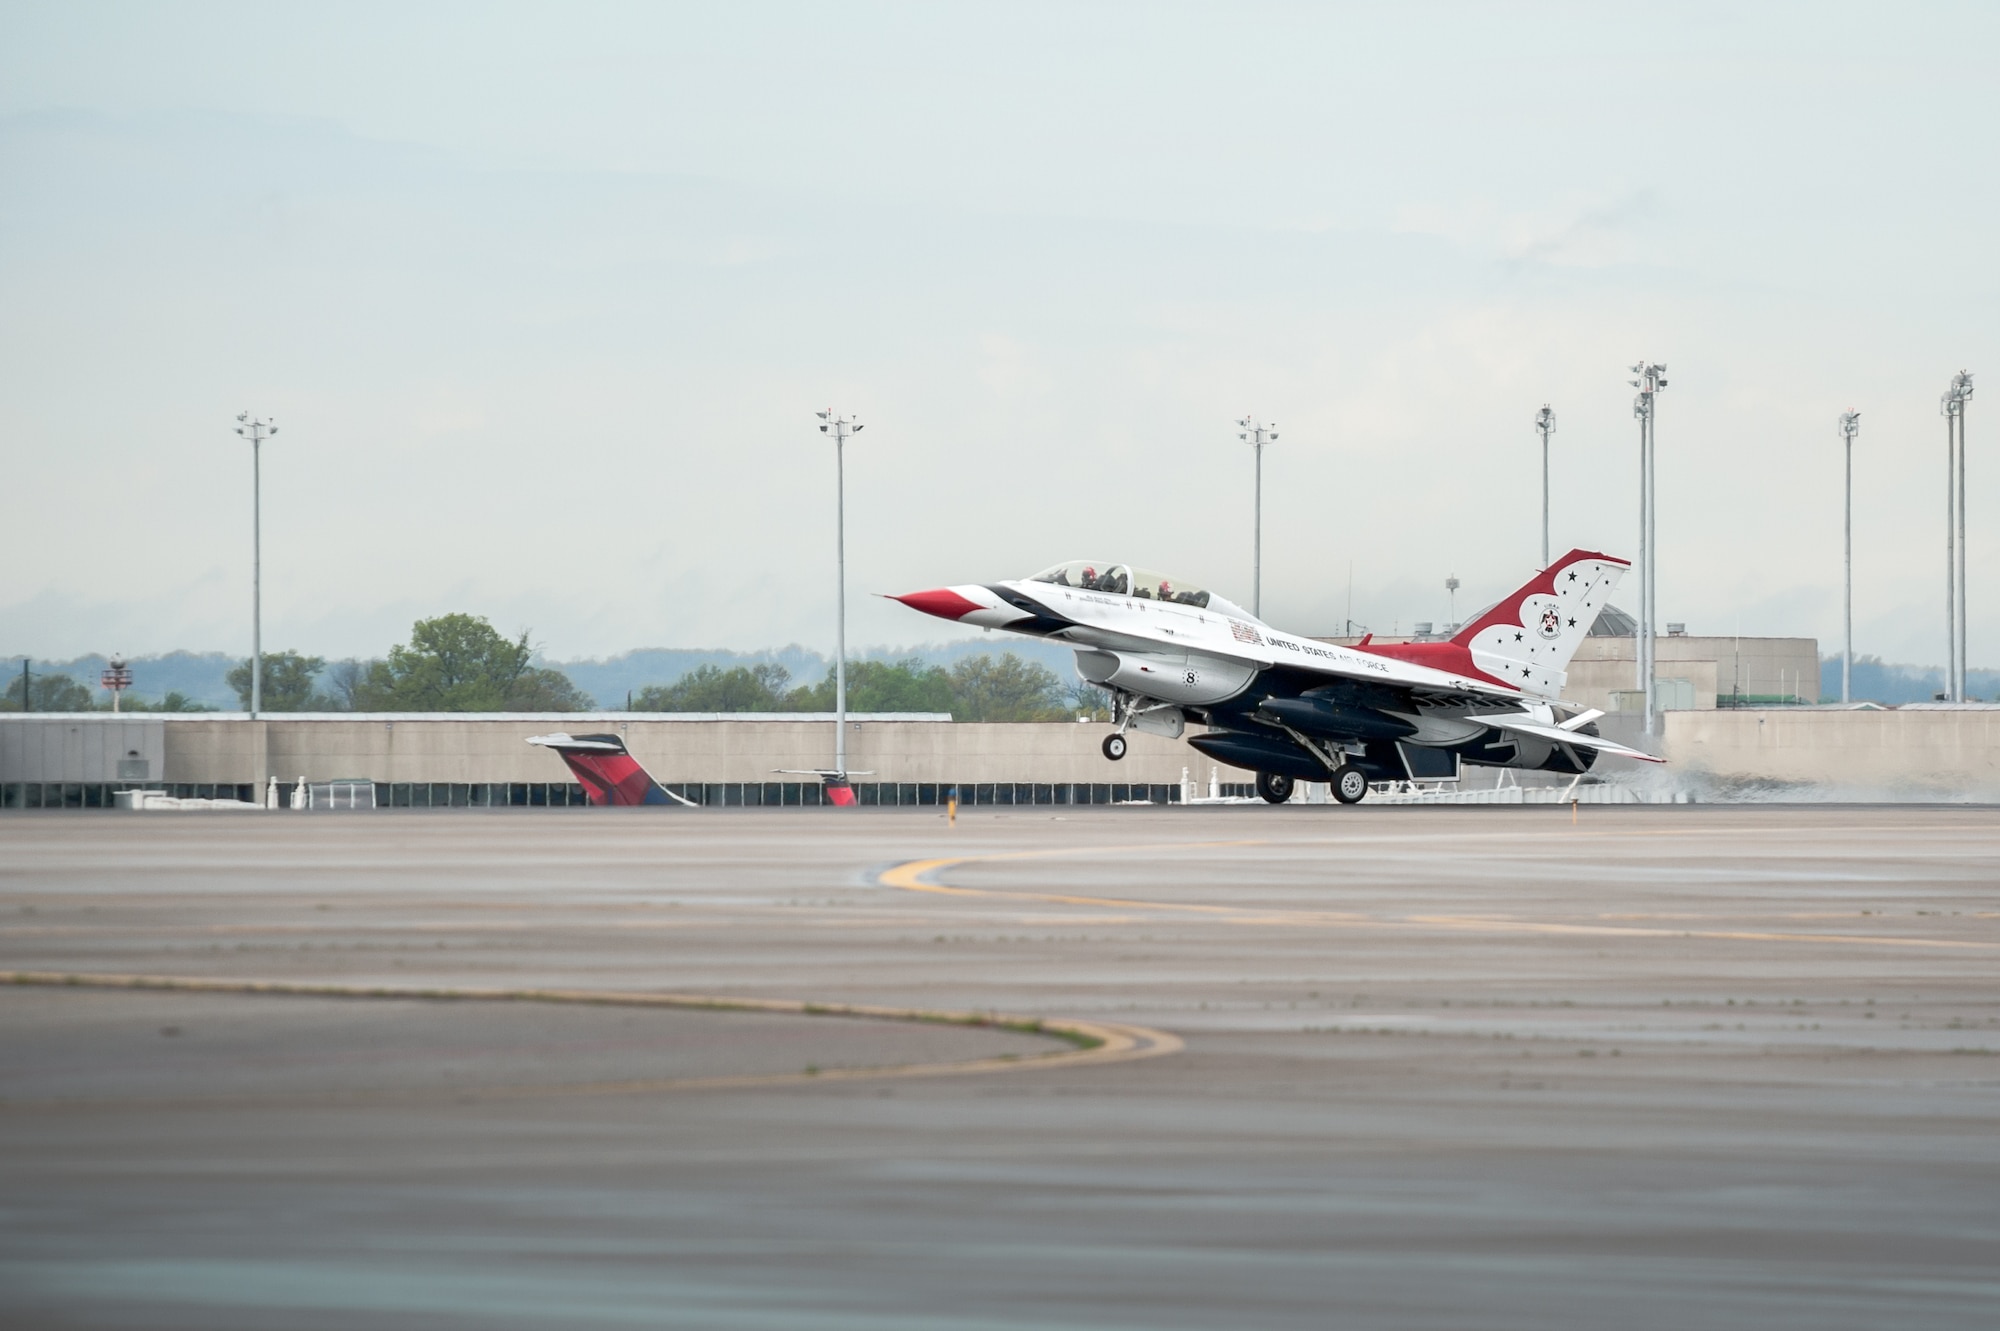 A U.S. Air Force Thunderbirds F-16  aircraft arrives at the Kentucky Air National Guard Base in Louisville, Ky., April 16, 2015. The Thunderbirds are performing in the 2015 Thunder Over Louisville air show, to be held April 18 over the Ohio River in downtown Louisville. The Kentucky Air Guard is providing logistical support to military aircraft flying in the air show. (U.S. Air National Guard photo by Maj. Dale Greer)